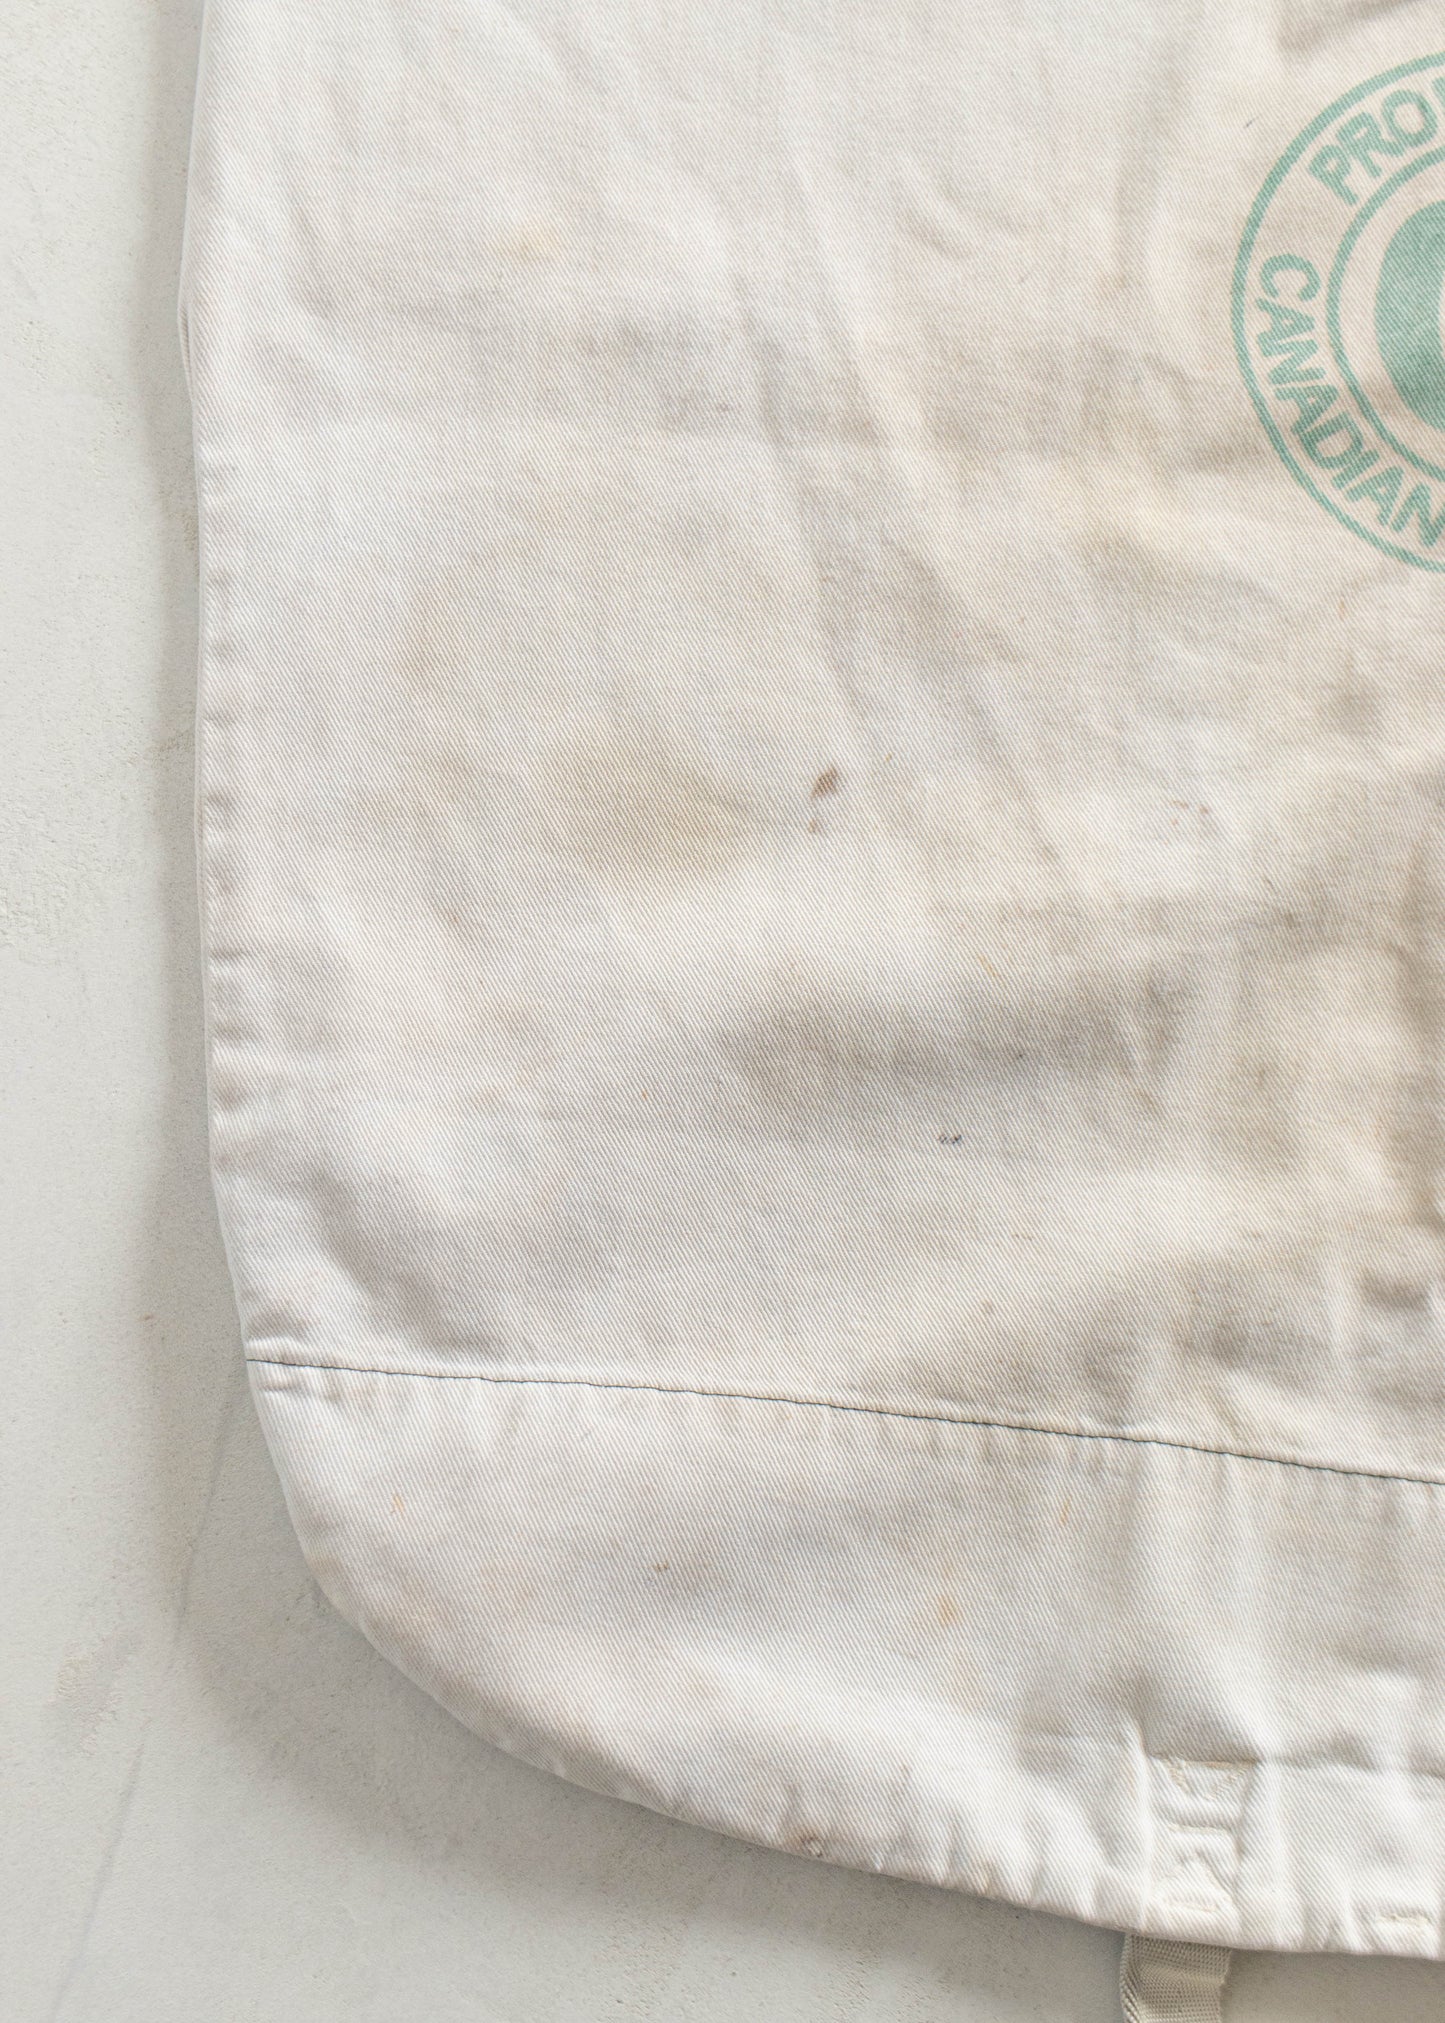 Vintage 1970s Canadian Linen Supply Cotton Twill Laundry Bag